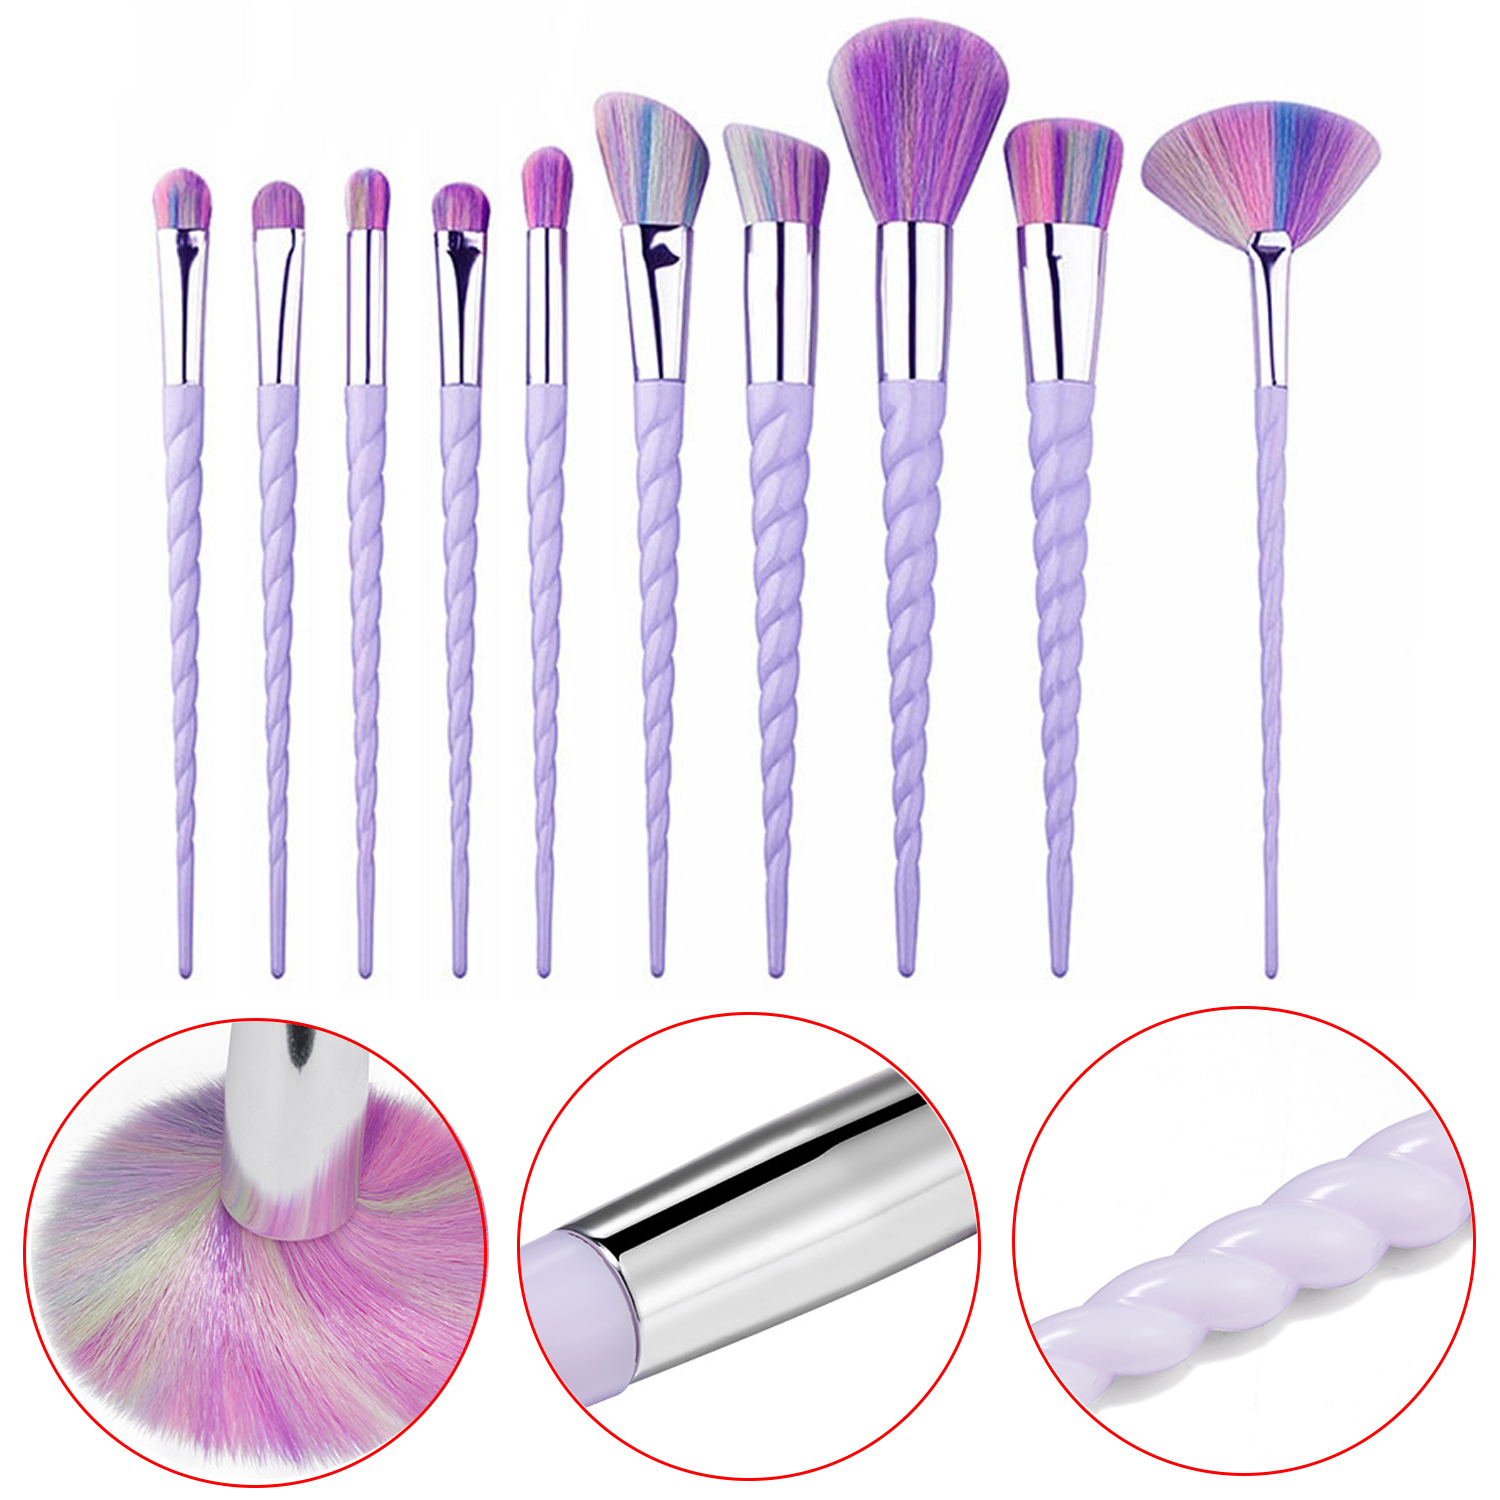 Hot Selling 10 Piece Rainbow Makeup Brush Set High Quality Beautiful Professional Beauty Accessories